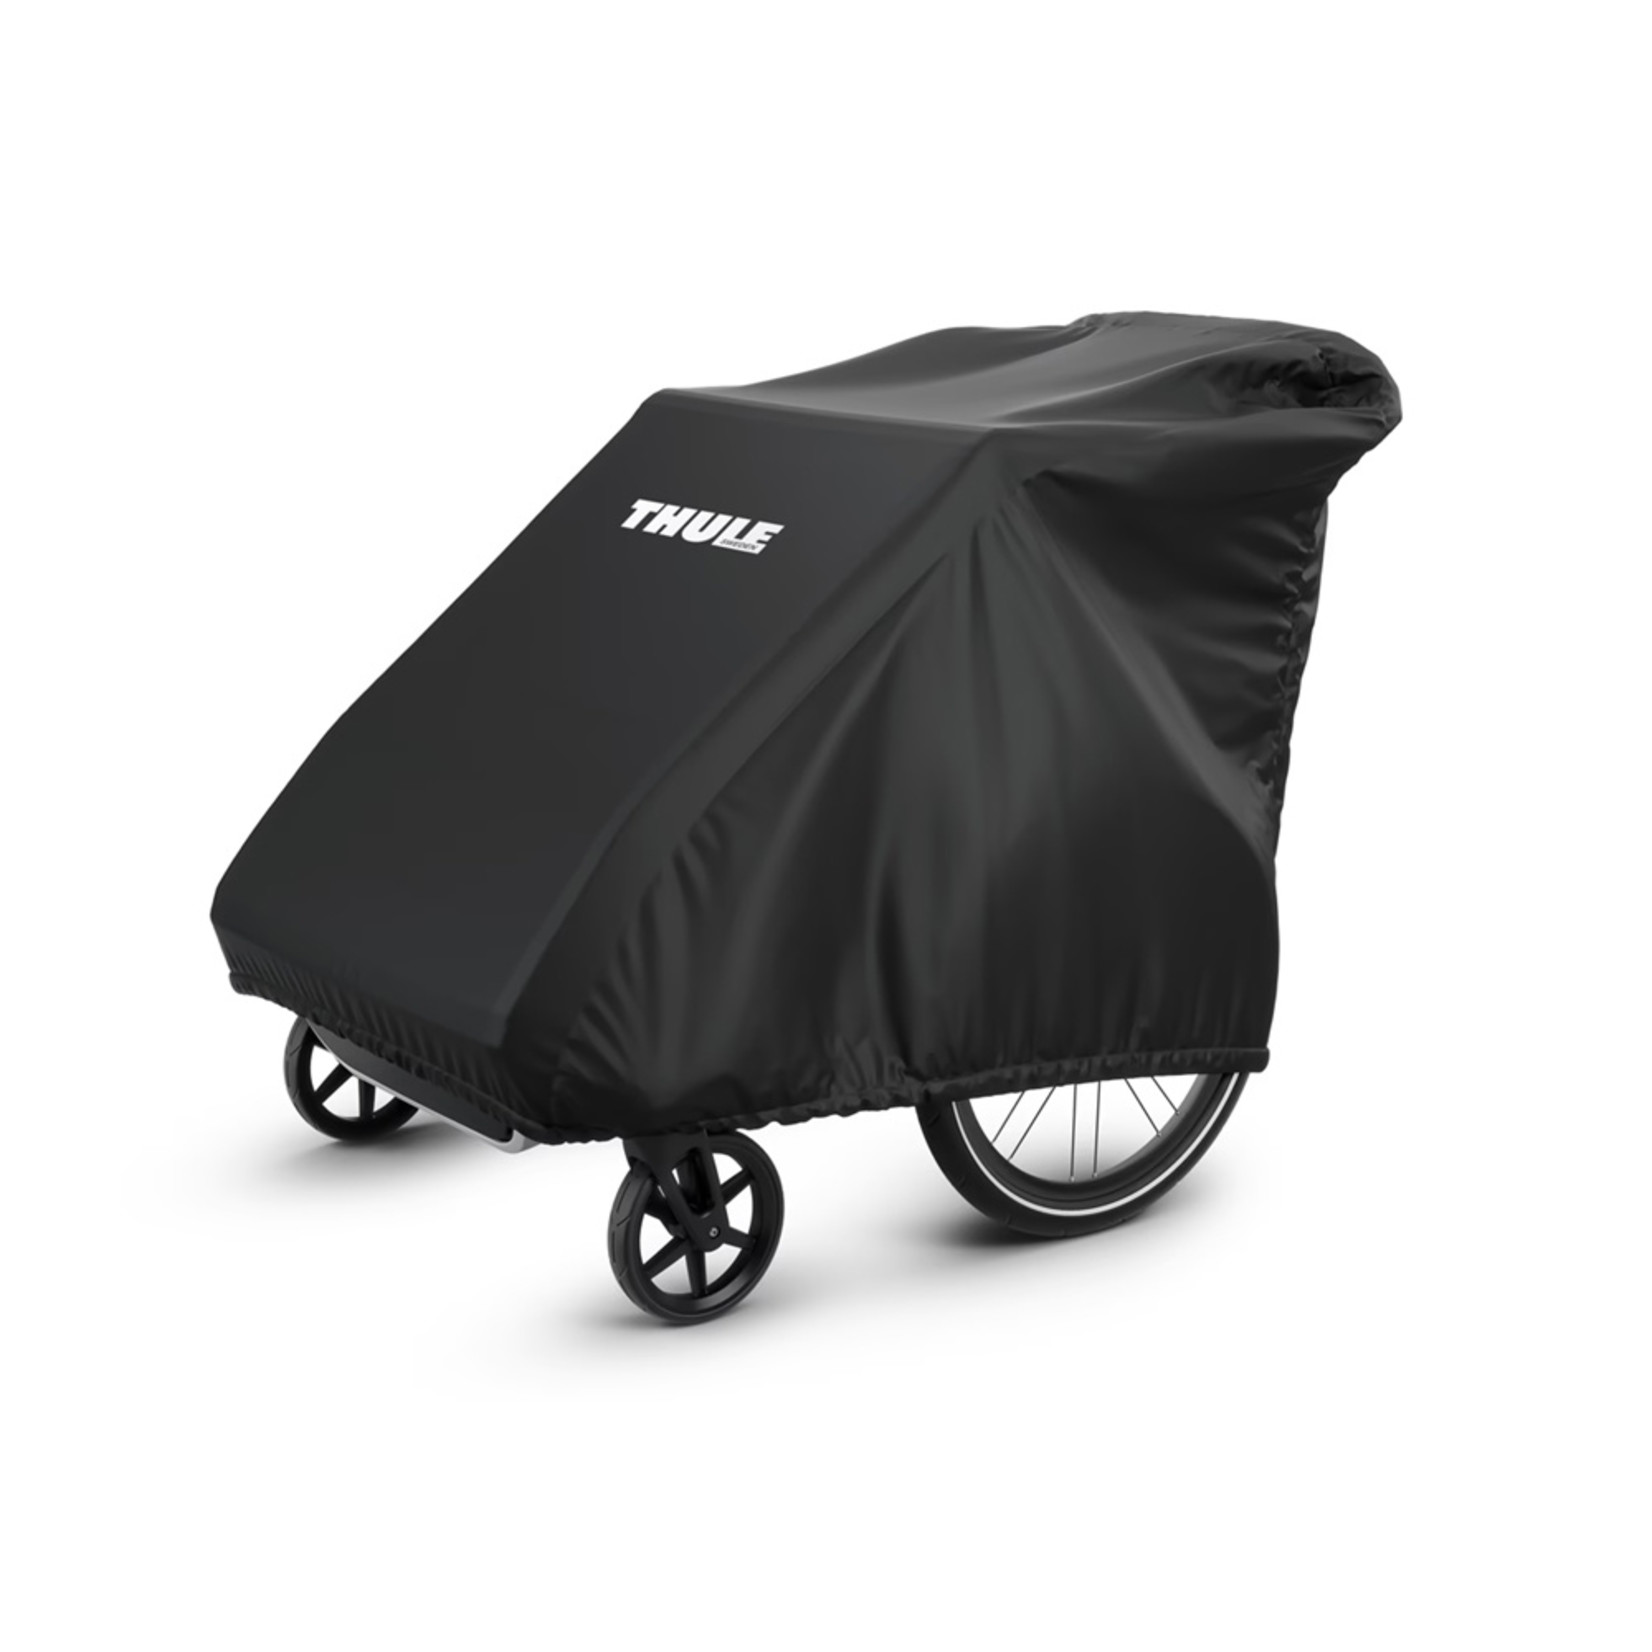 Thule Thule Chariot Storage Cover 20100784 - Black